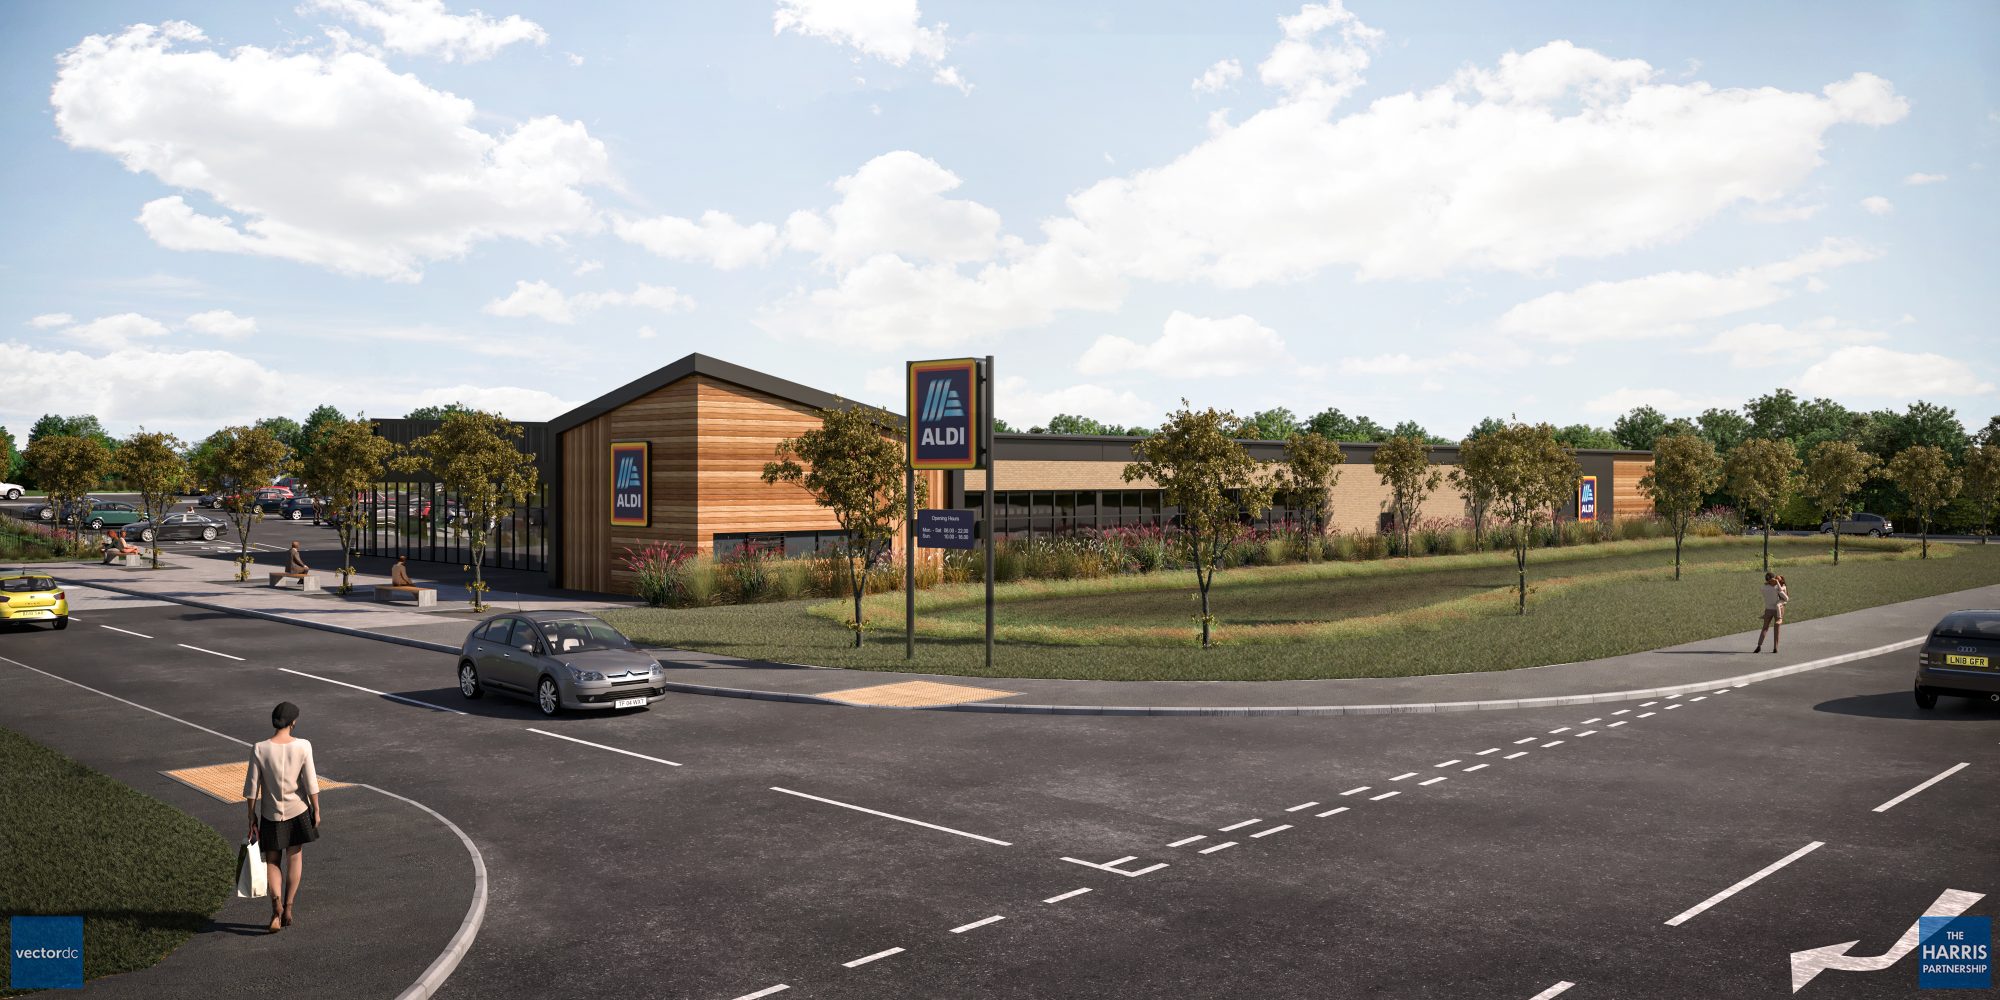 Viking Park, Congleton. CGI of an aldi store and a road